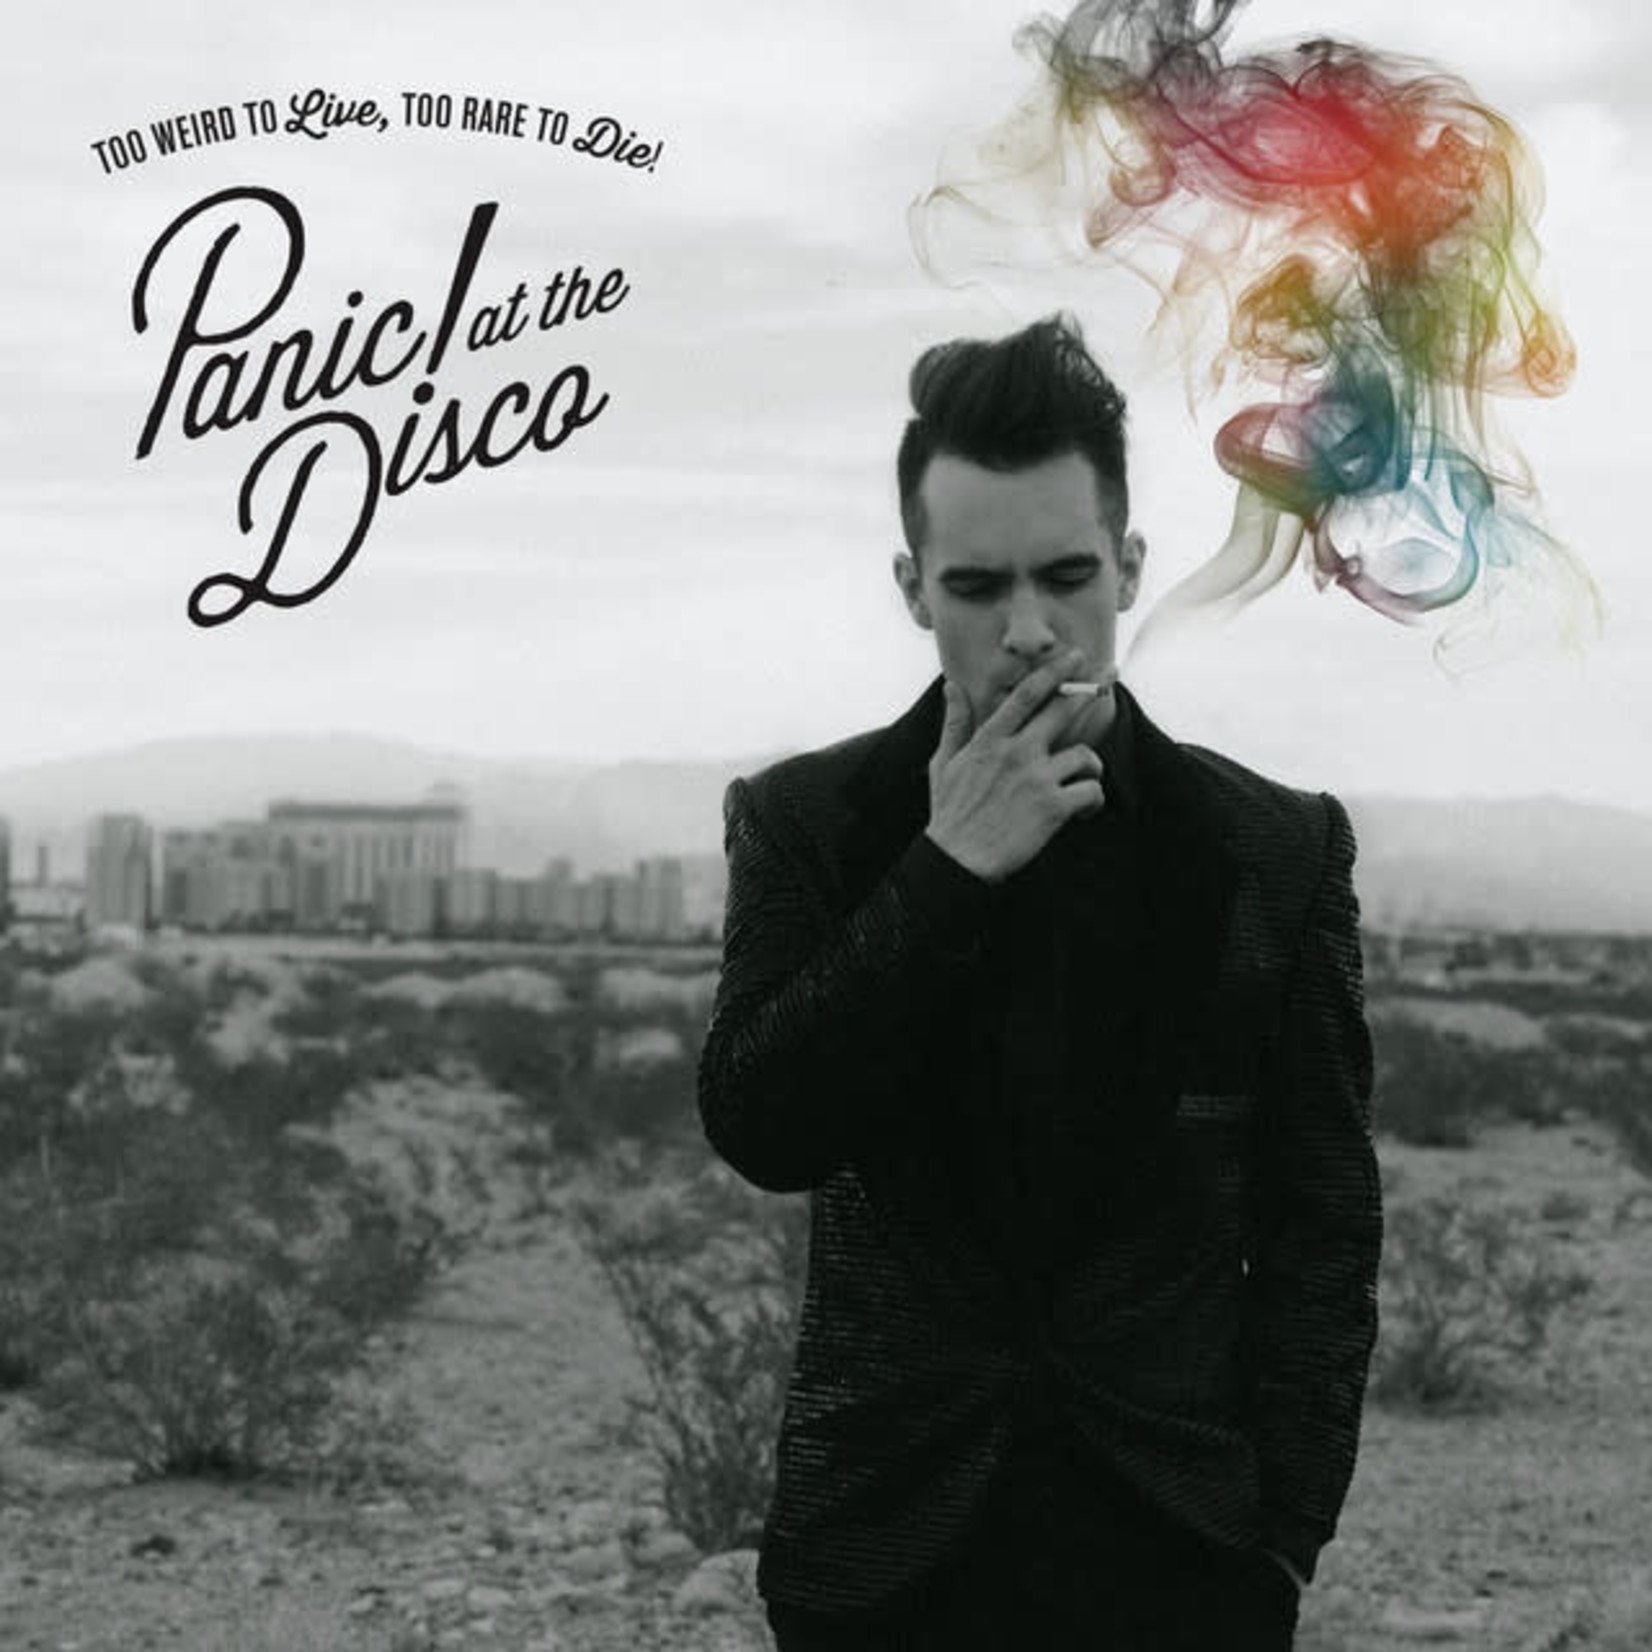 Vinyl Panic At The Disco -Too Weird To Live